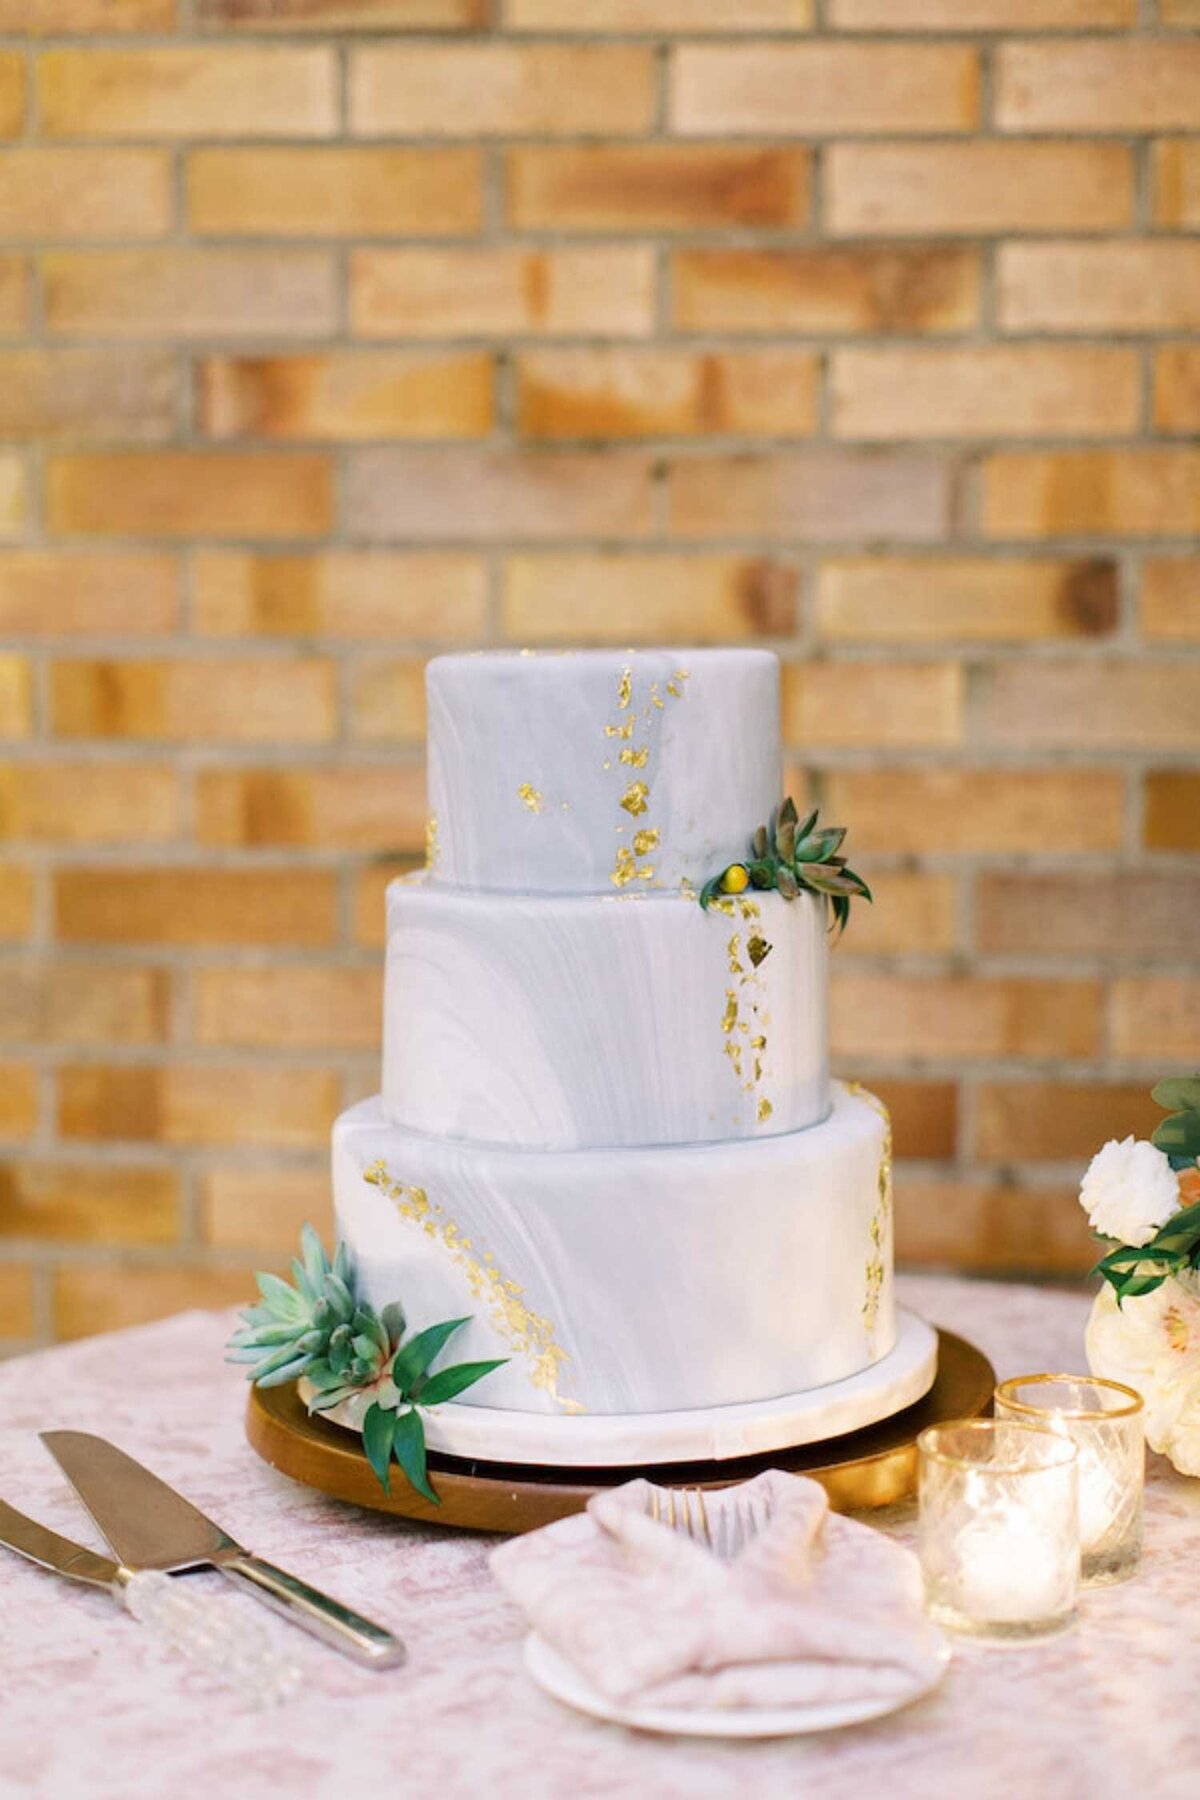 Geode inspired marble cake on a wooden cake stand for a luxury Chicago outdoor garden wedding.